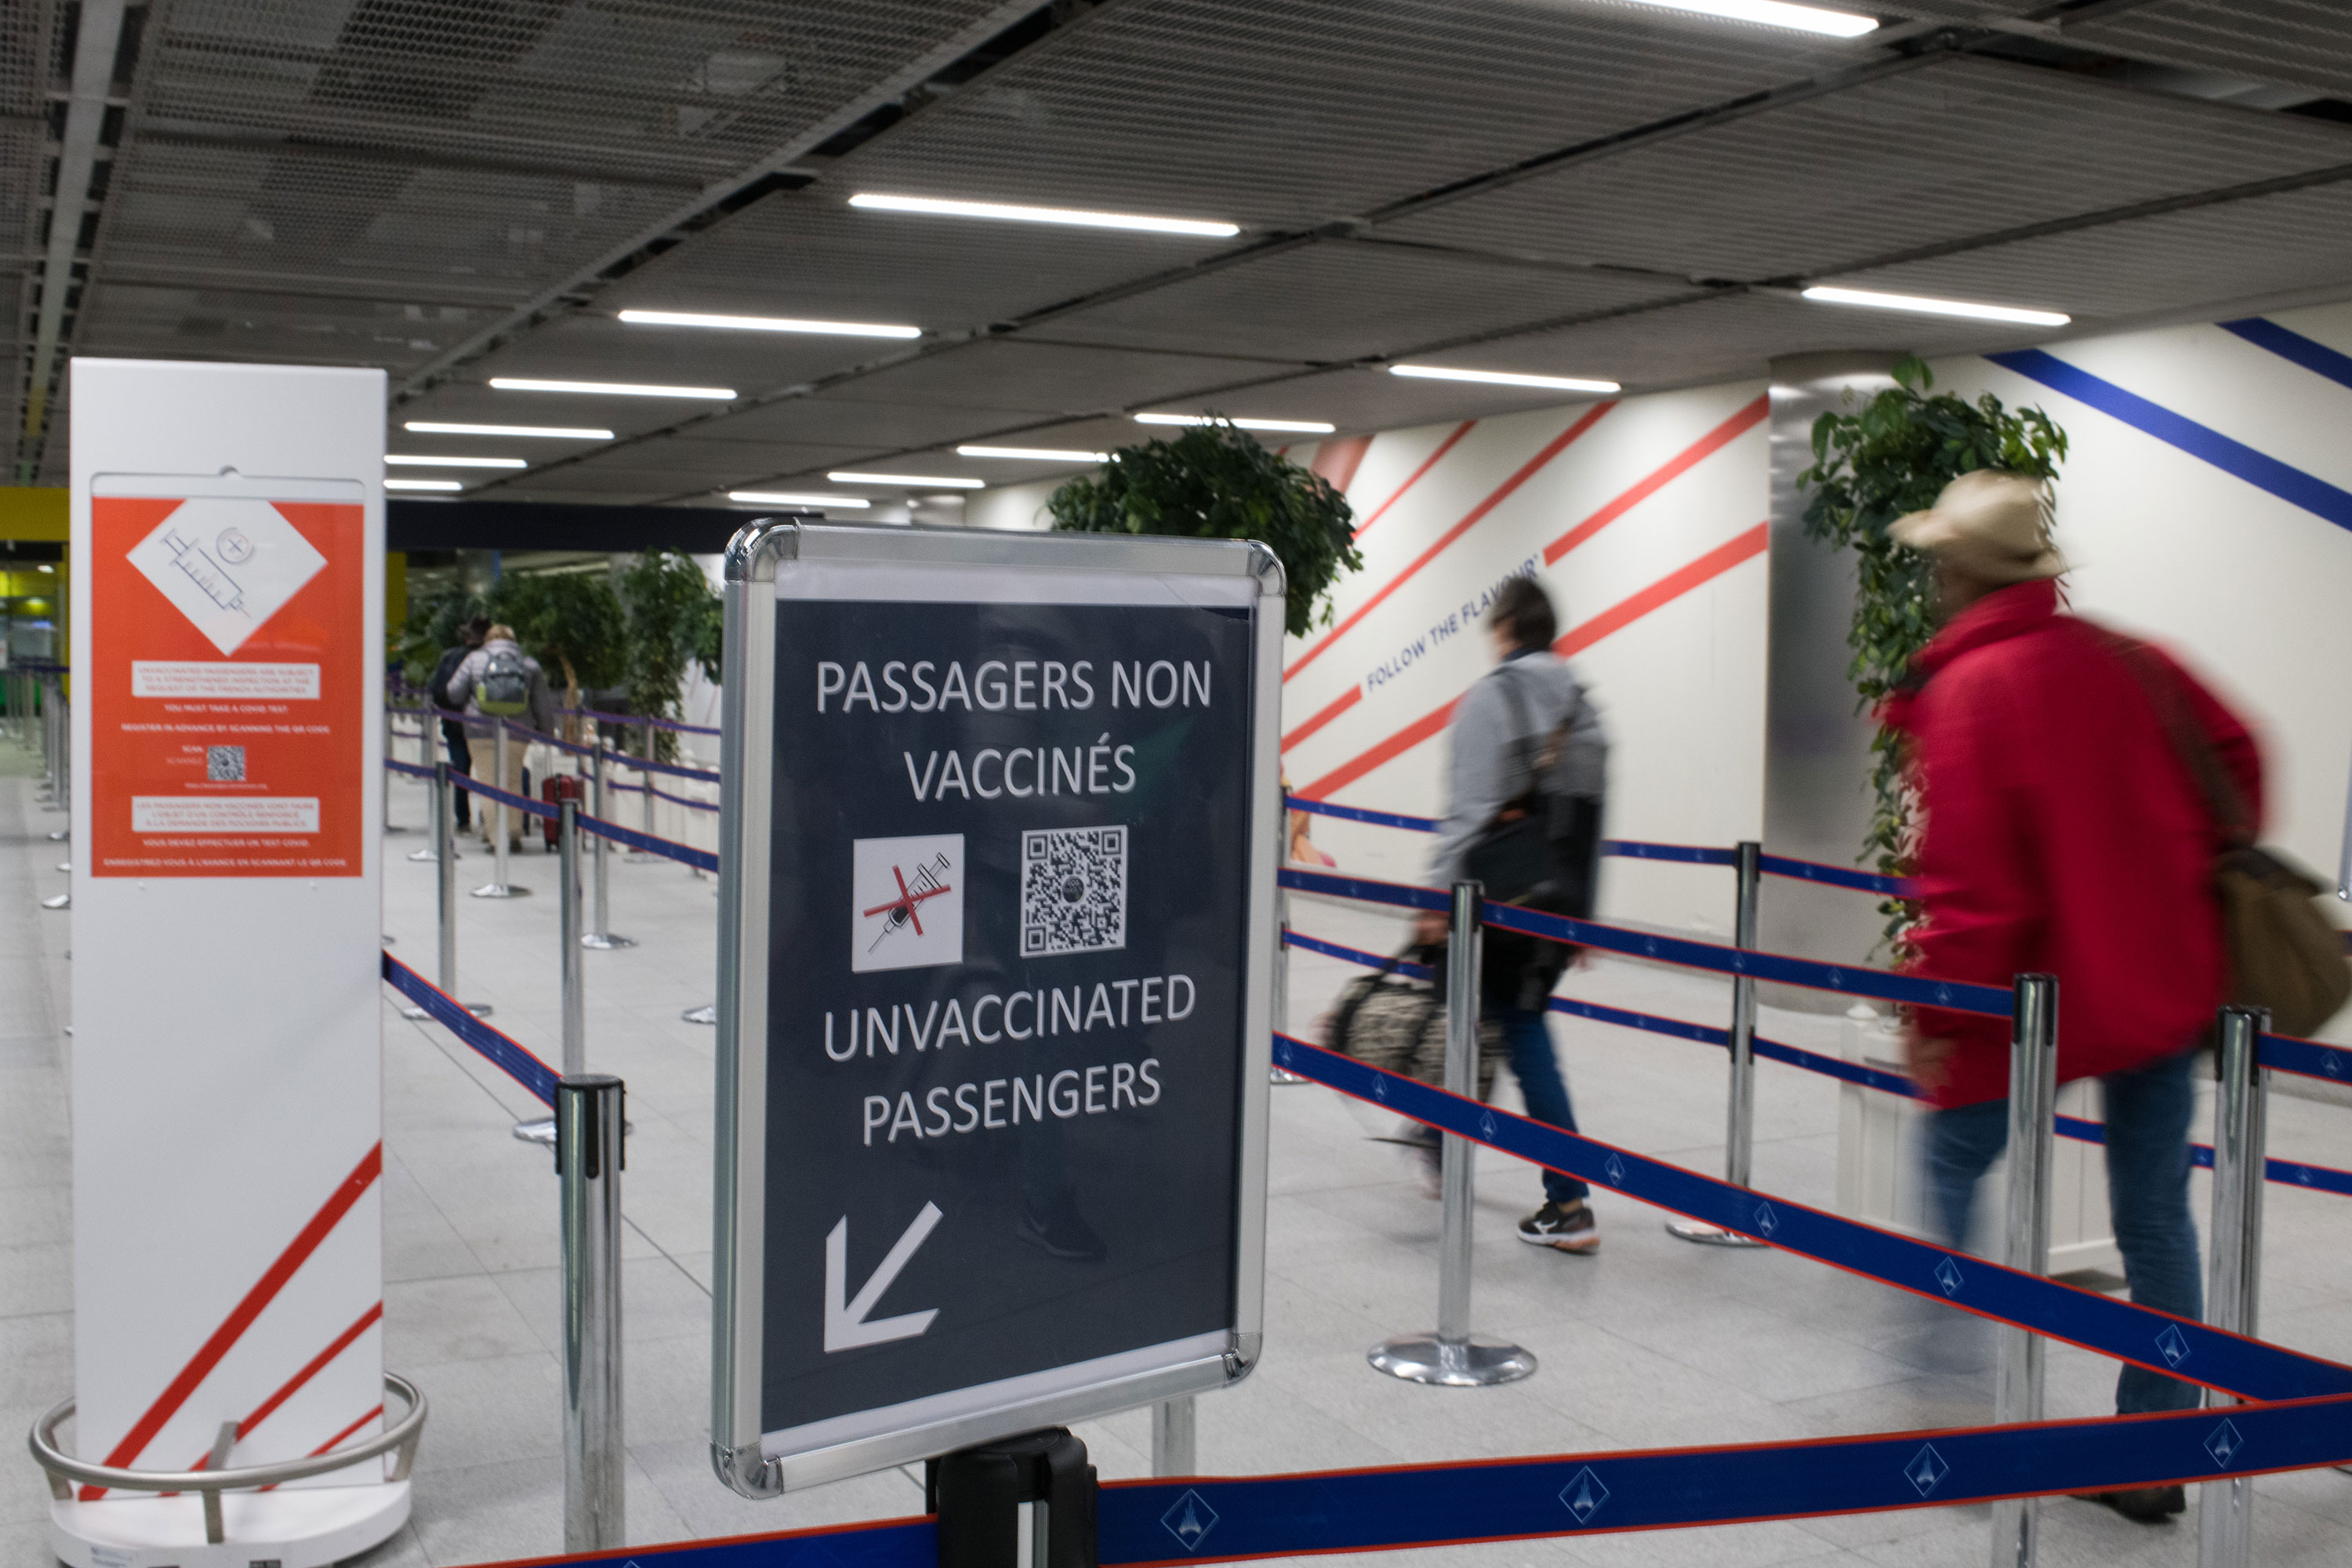 Travelers walk past a sign for unvaccinated passengers at Charles de Gaulle Airport in Paris on December 14.